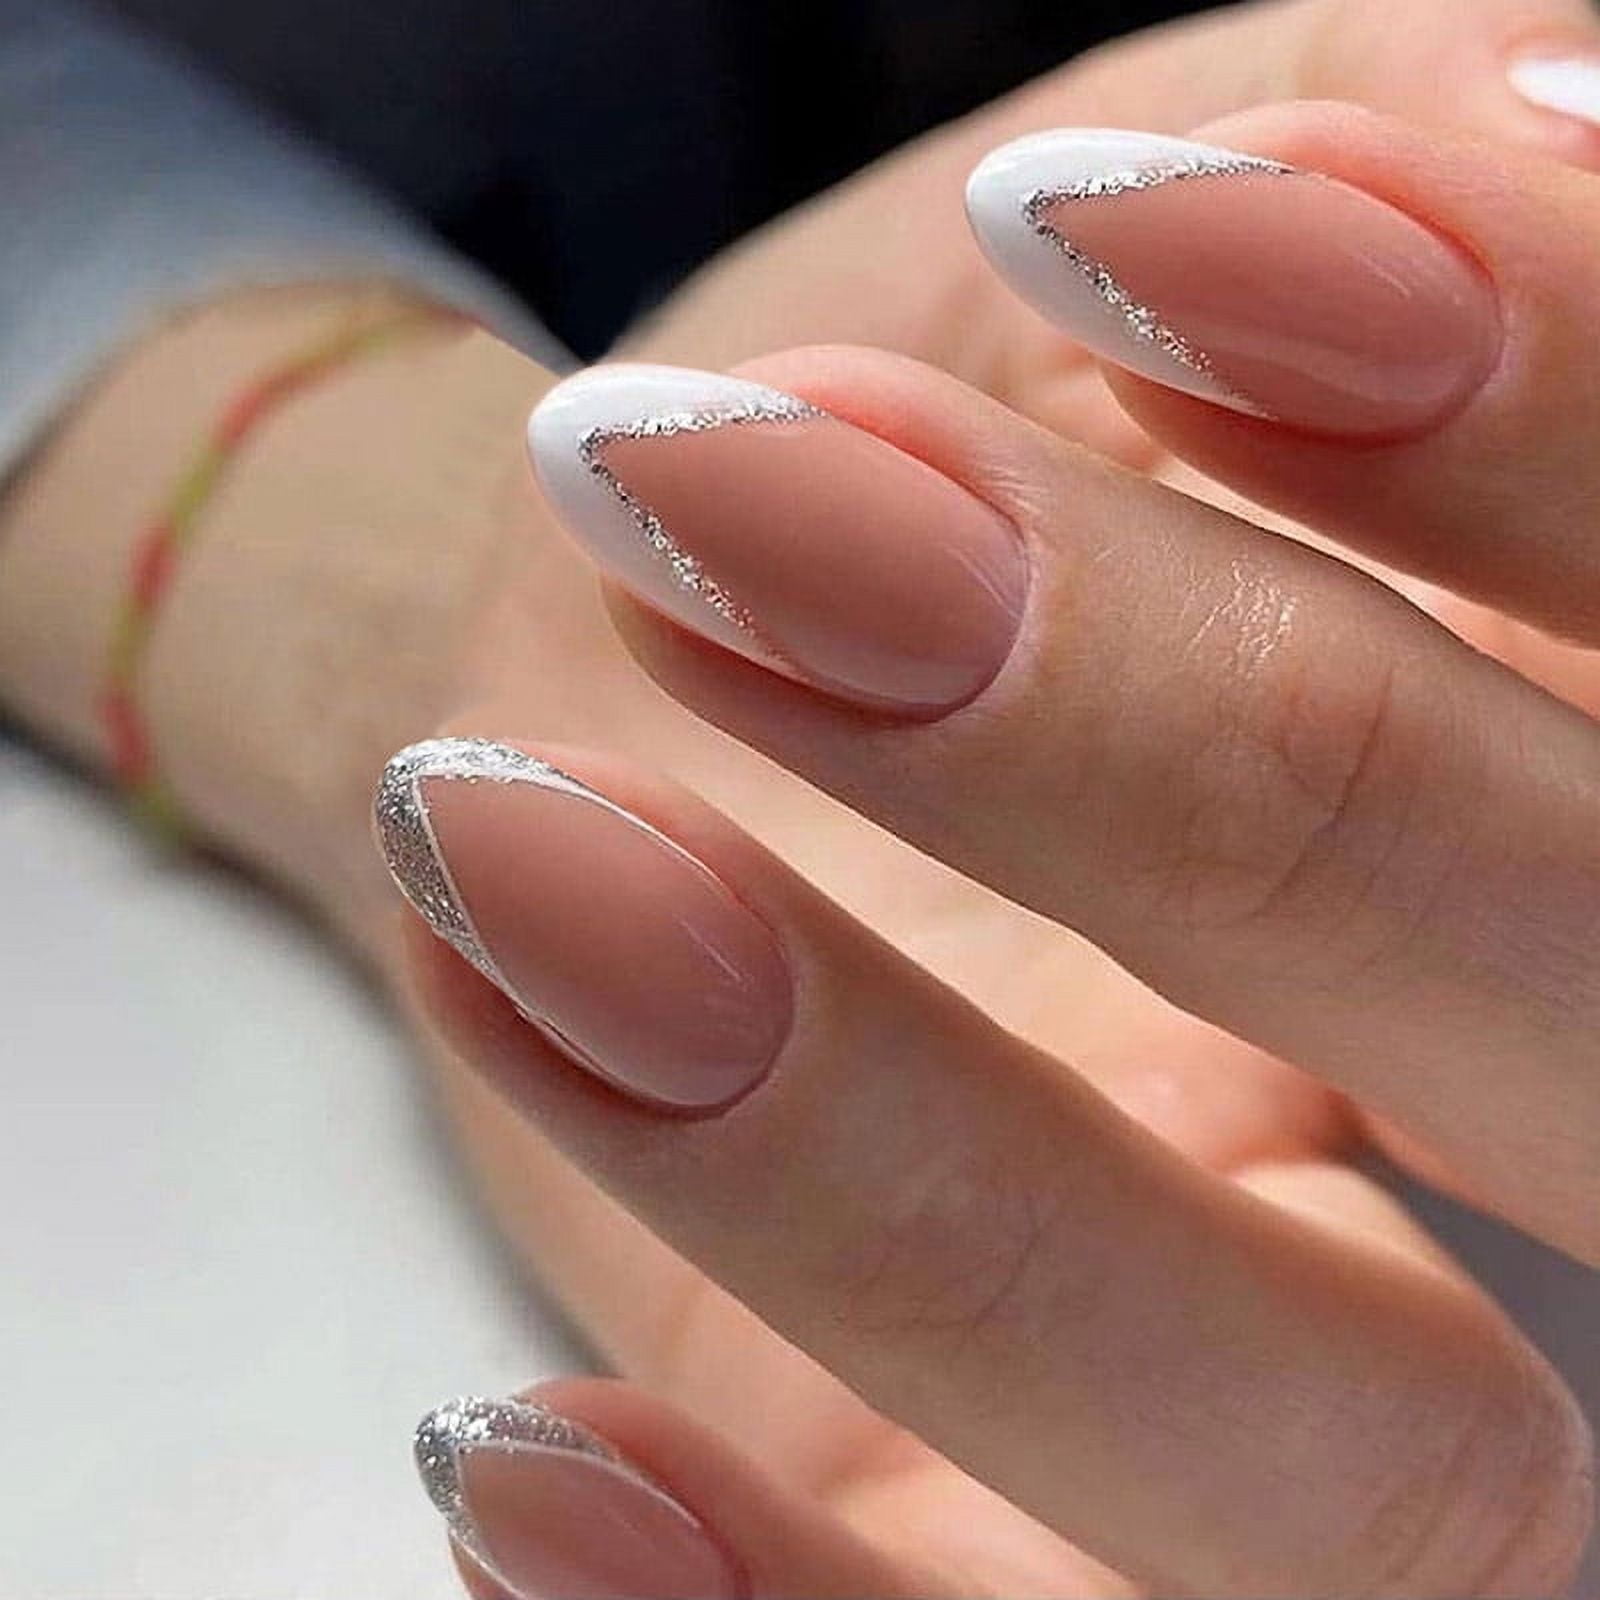 What Is The Modern French Manicure?